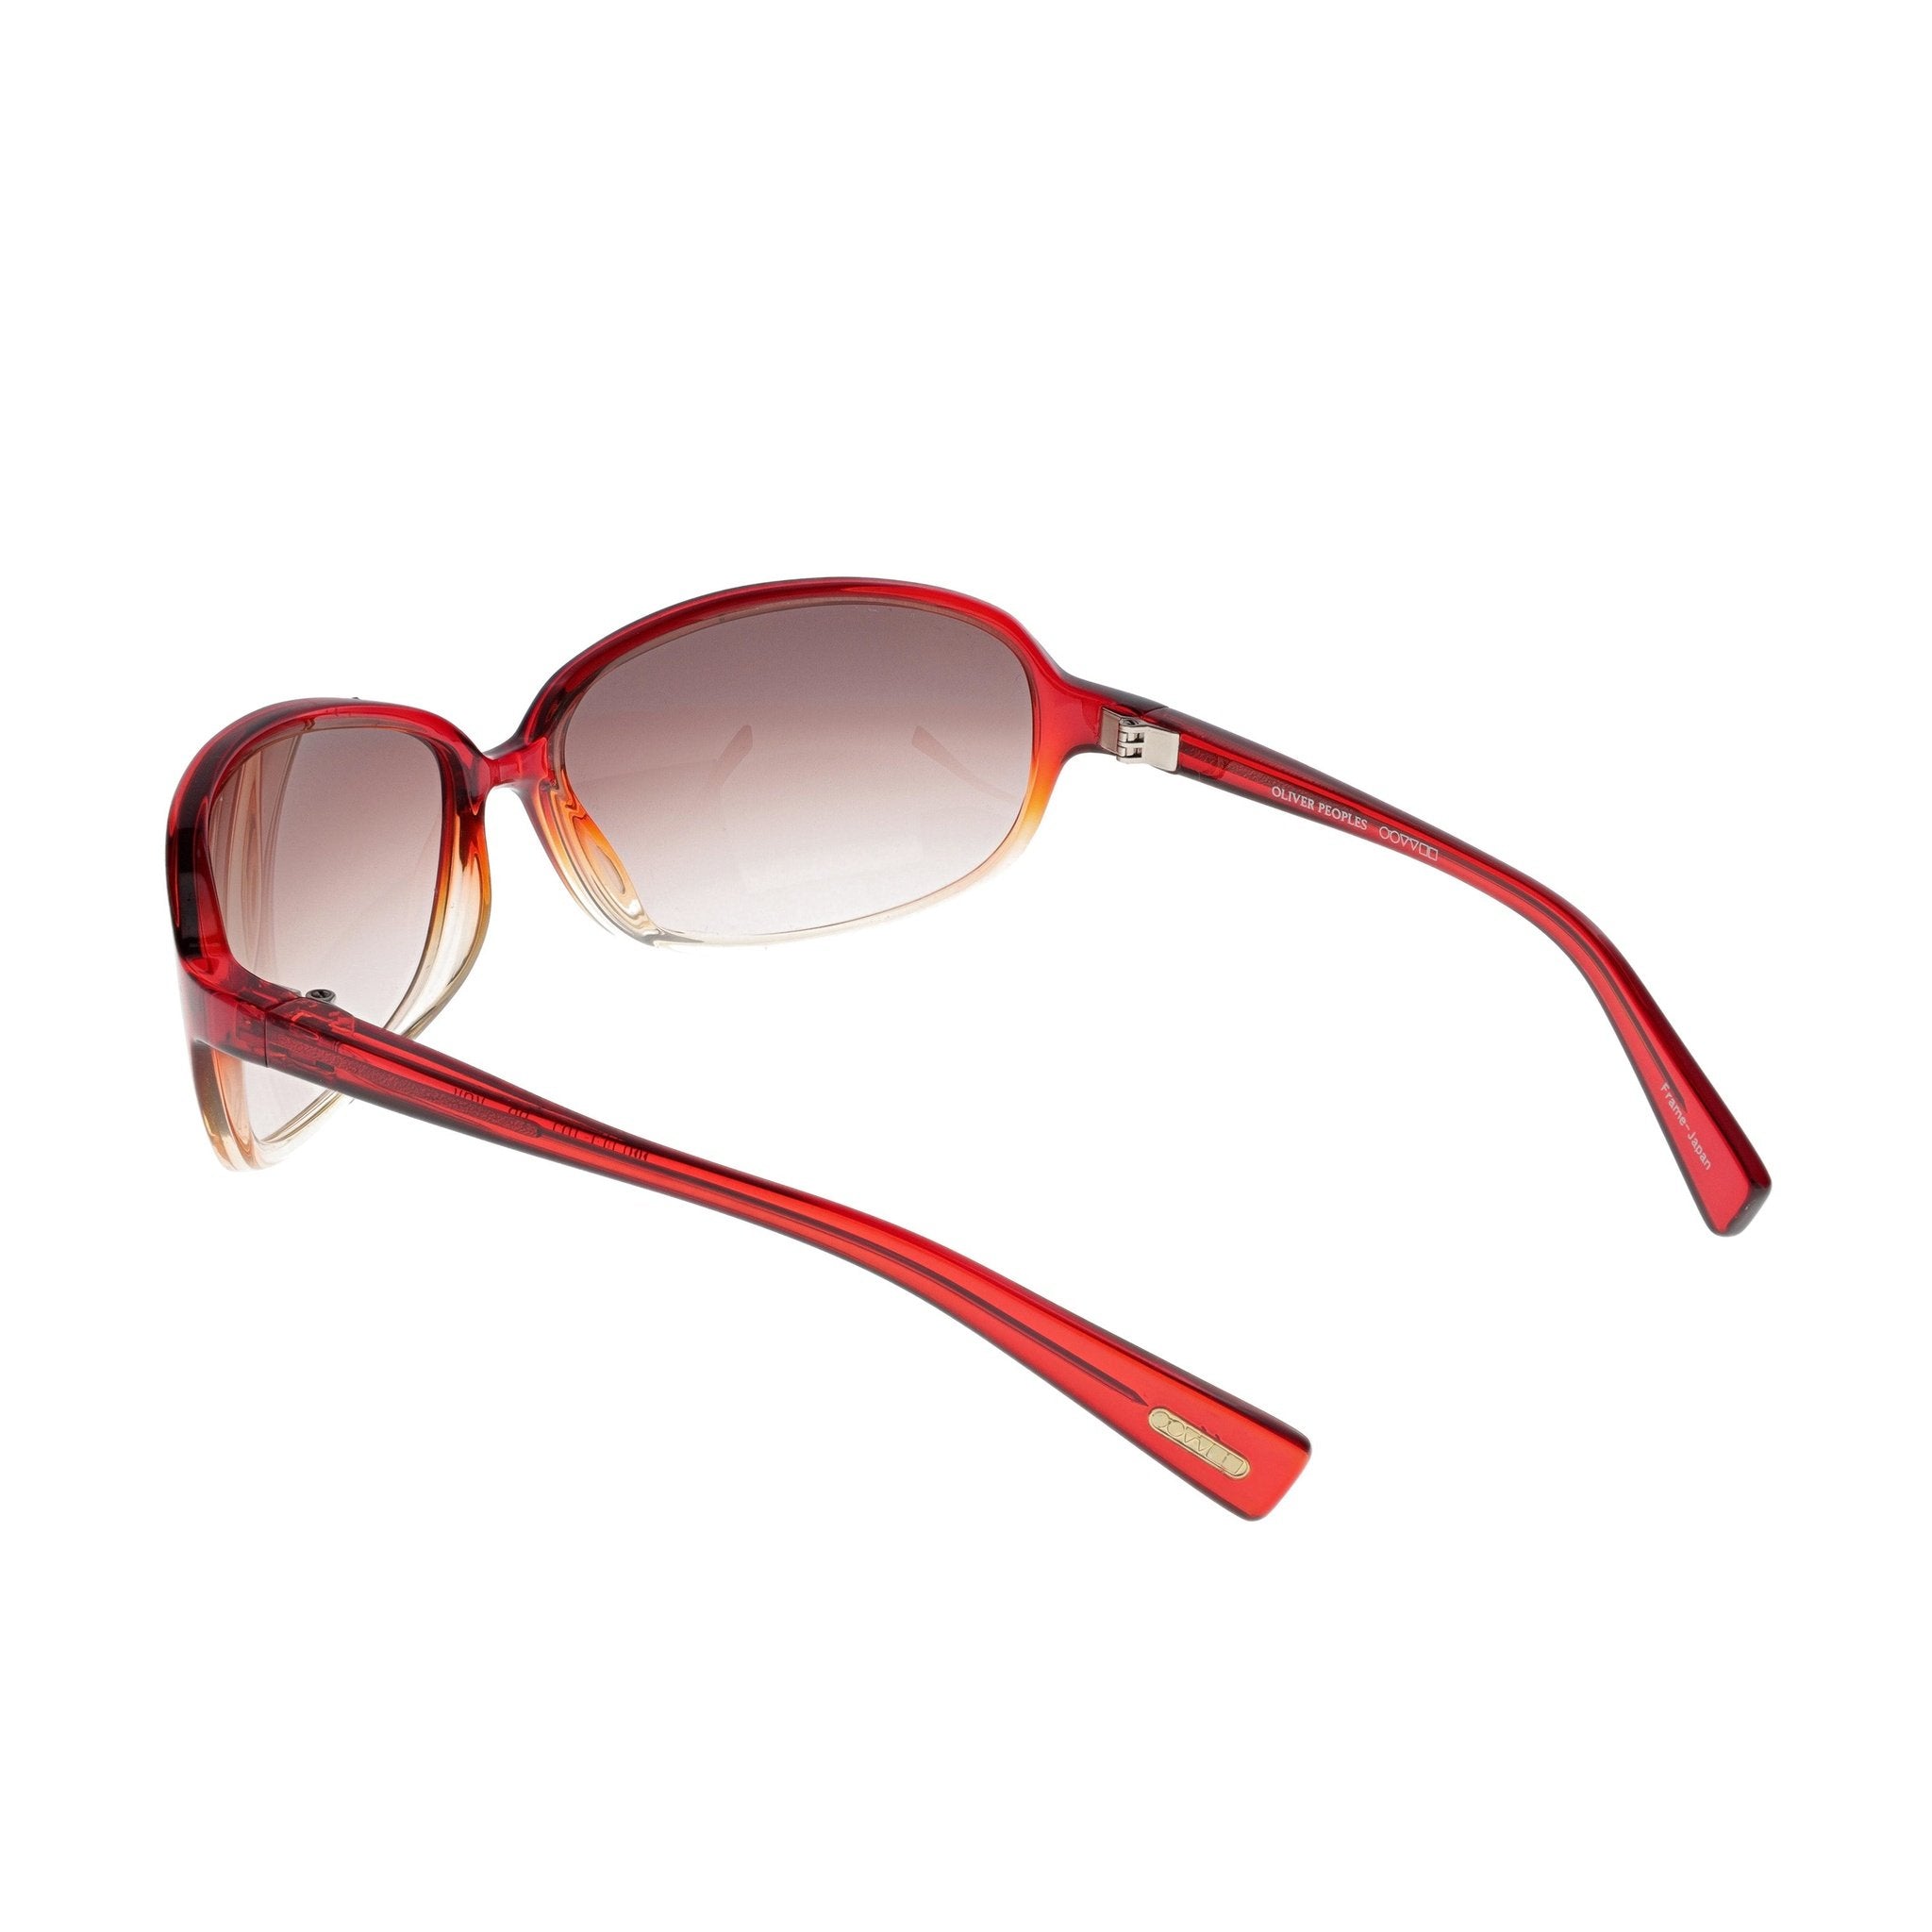 Oliver Peoples BB Sunglasses - Red